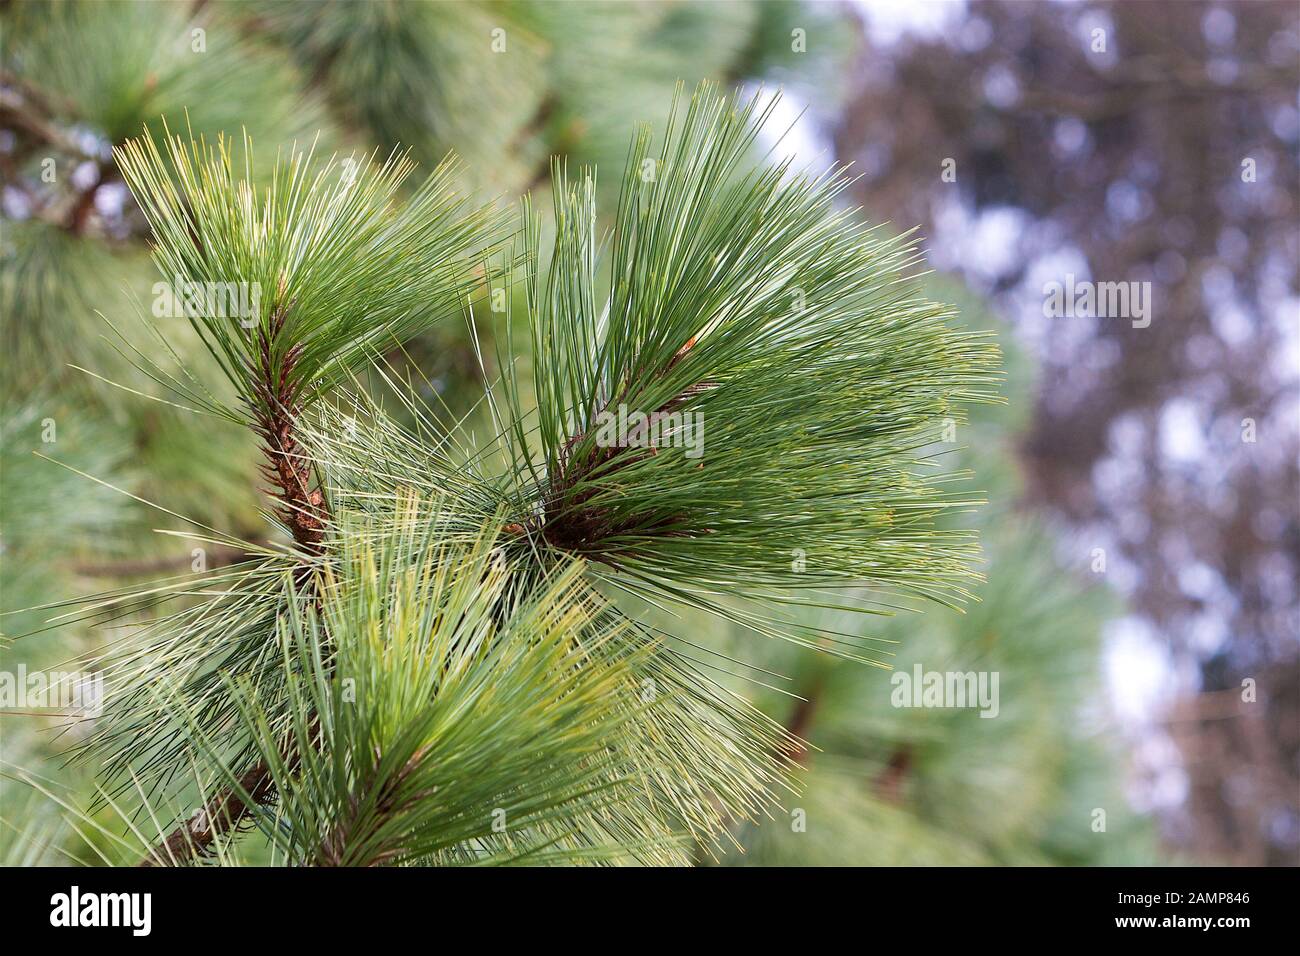 Close-up shot of the needles on a pine tree. Stock Photo